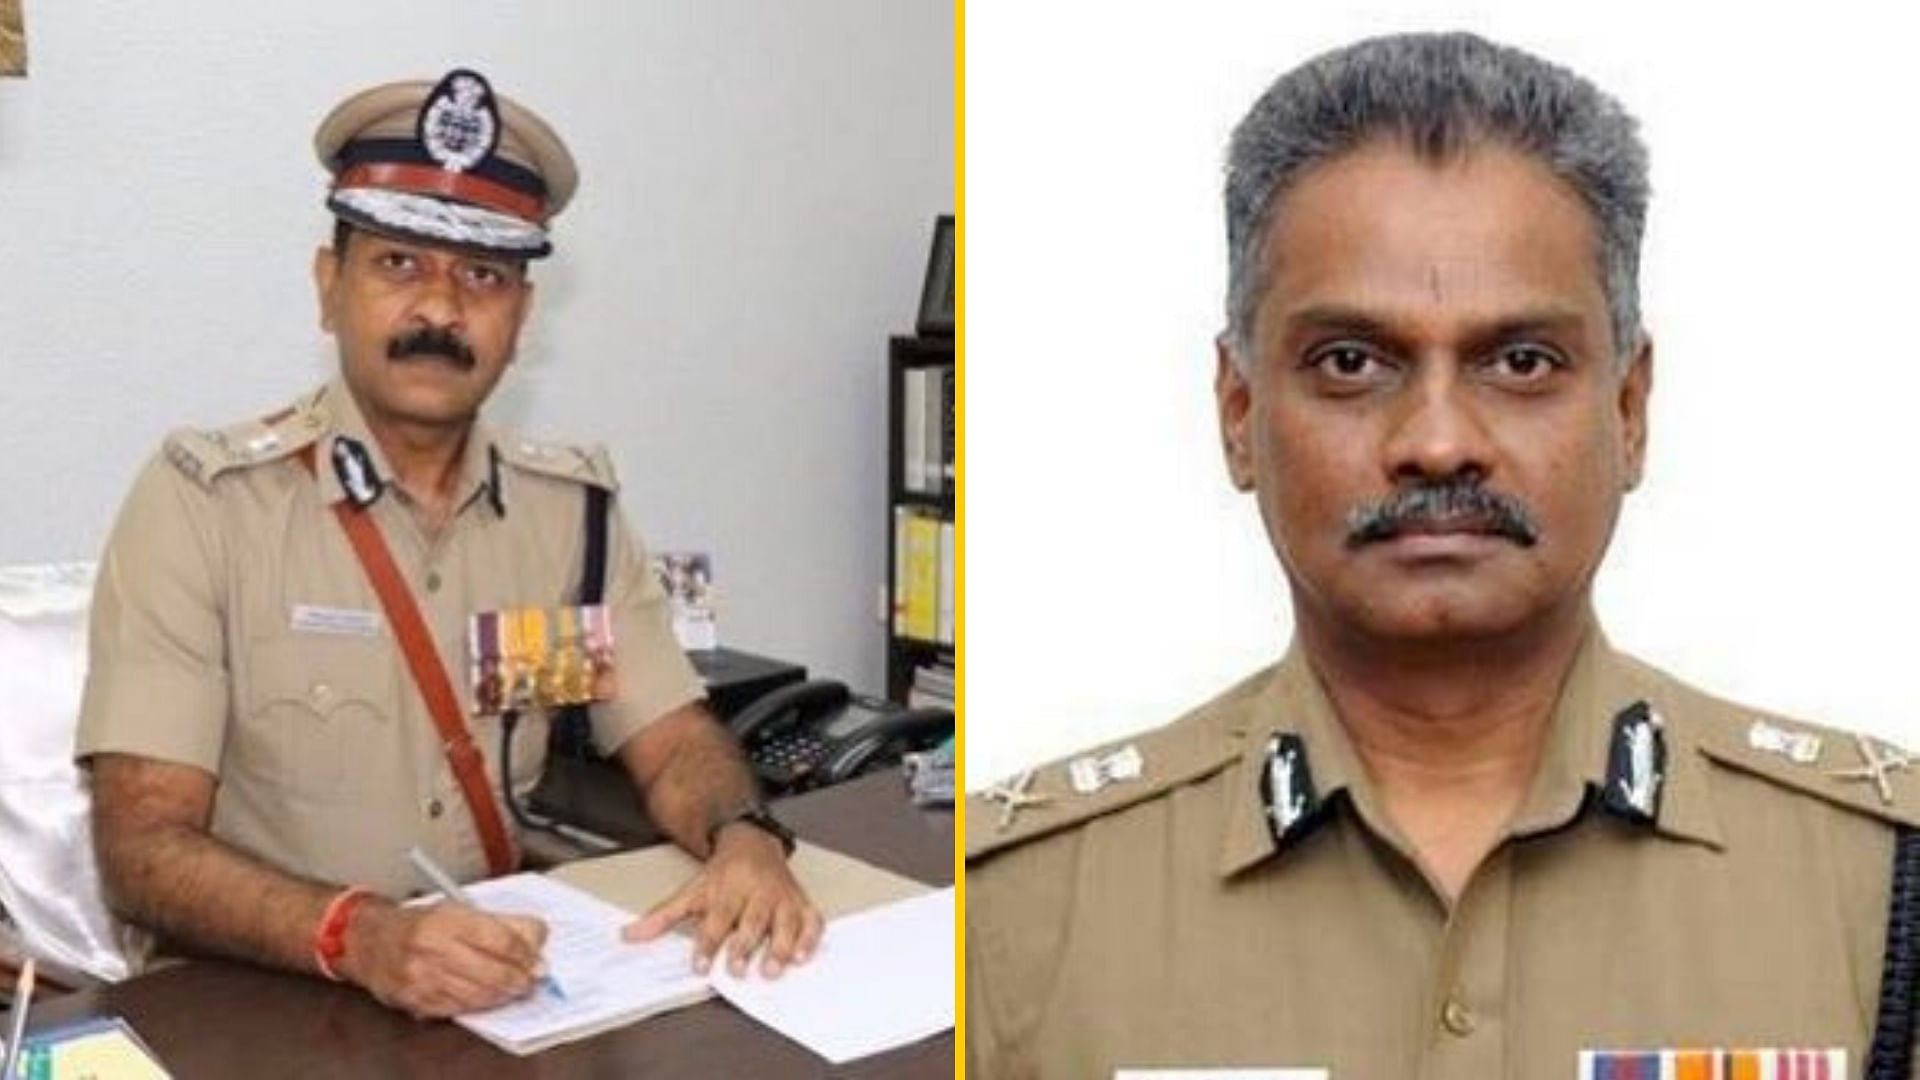 The Tamil Nadu government has appointed Mahesh Kumar Aggarwal (left) as Chennai’s City Commissioner replacing AK Viswanathan (right).